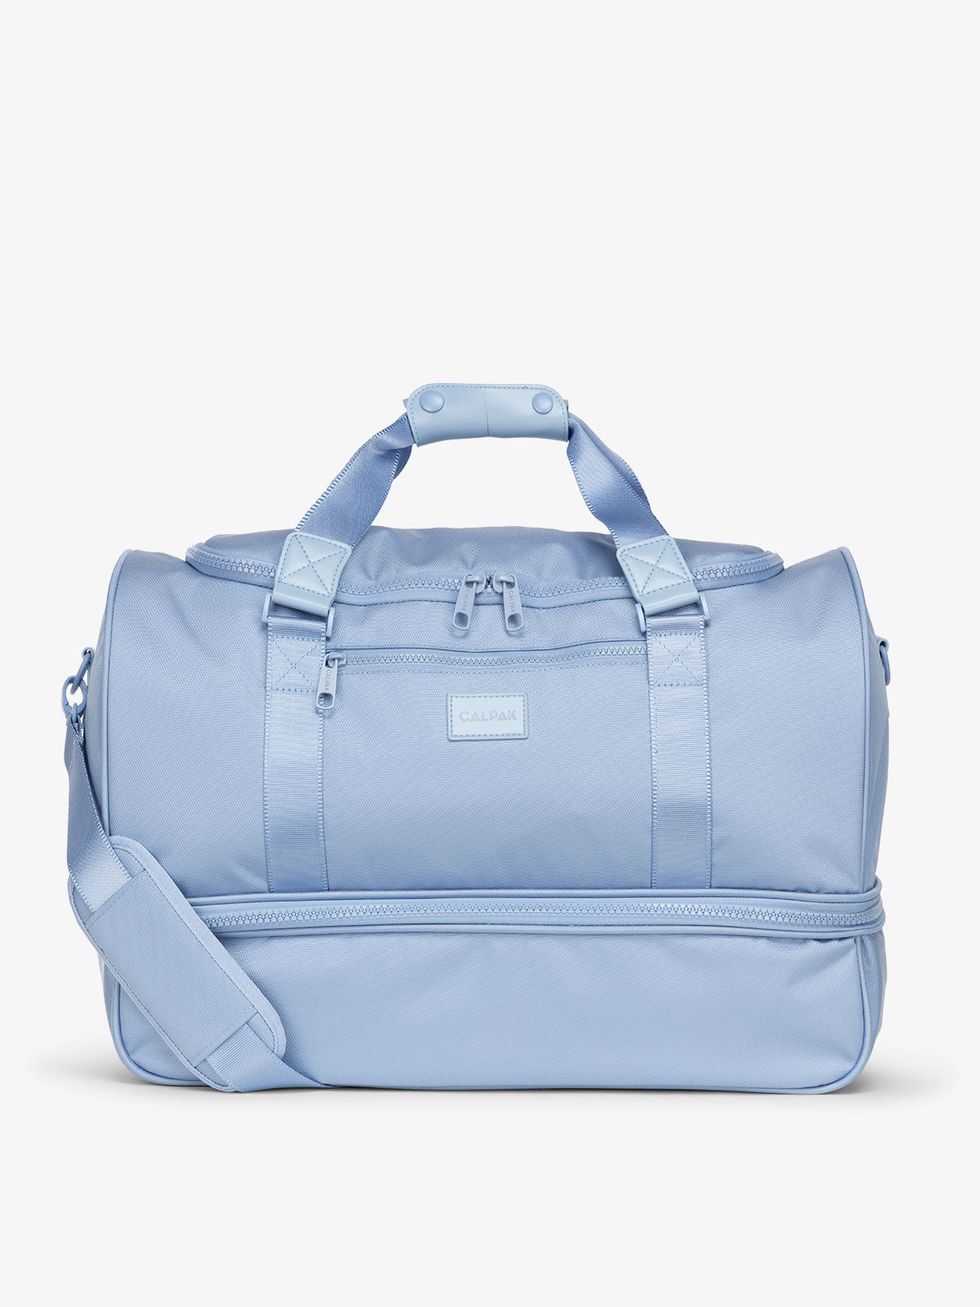 20 Best Weekender Bags for Women 2023 — Chic Duffels and Totes for